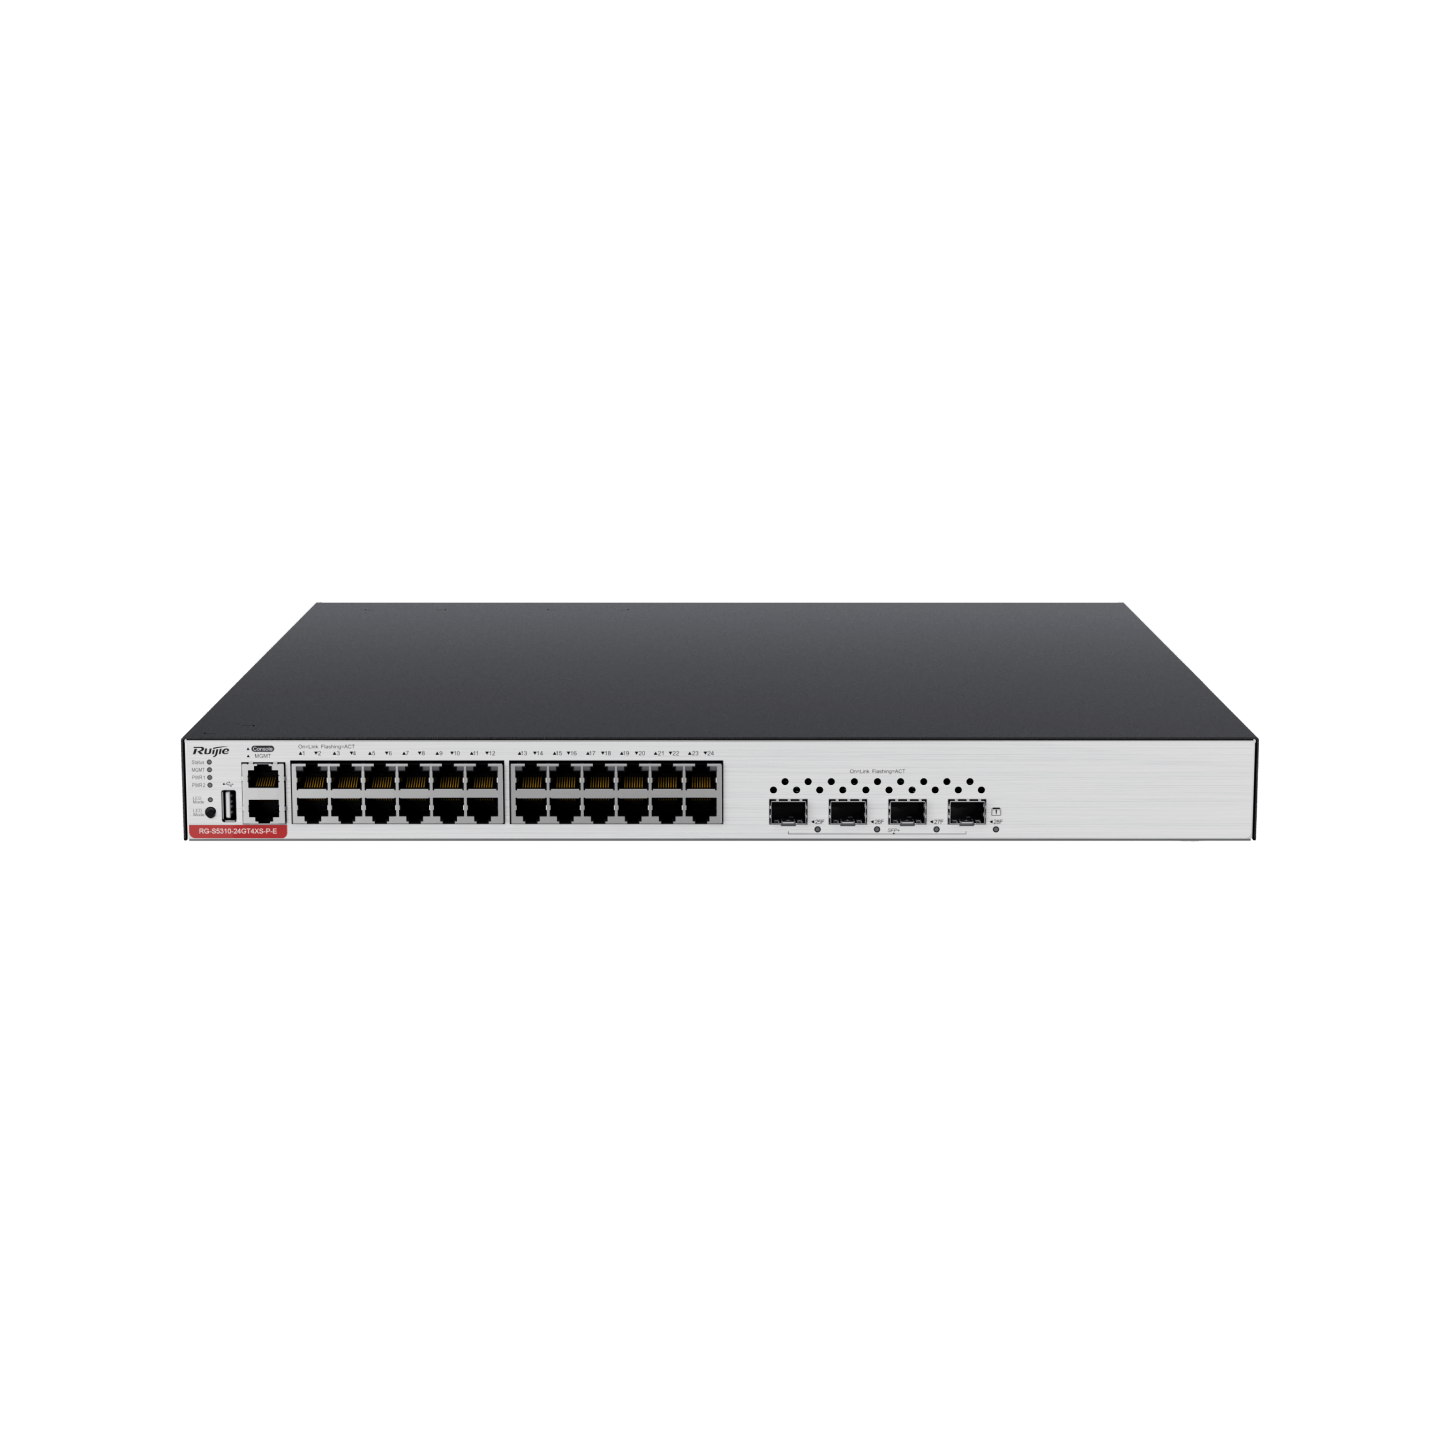 RG-S5310-24GT4XS-P-E 24-Port GE Electrical Layer 3 Managed Access Switch with PoE+, Four 10G Uplink Ports